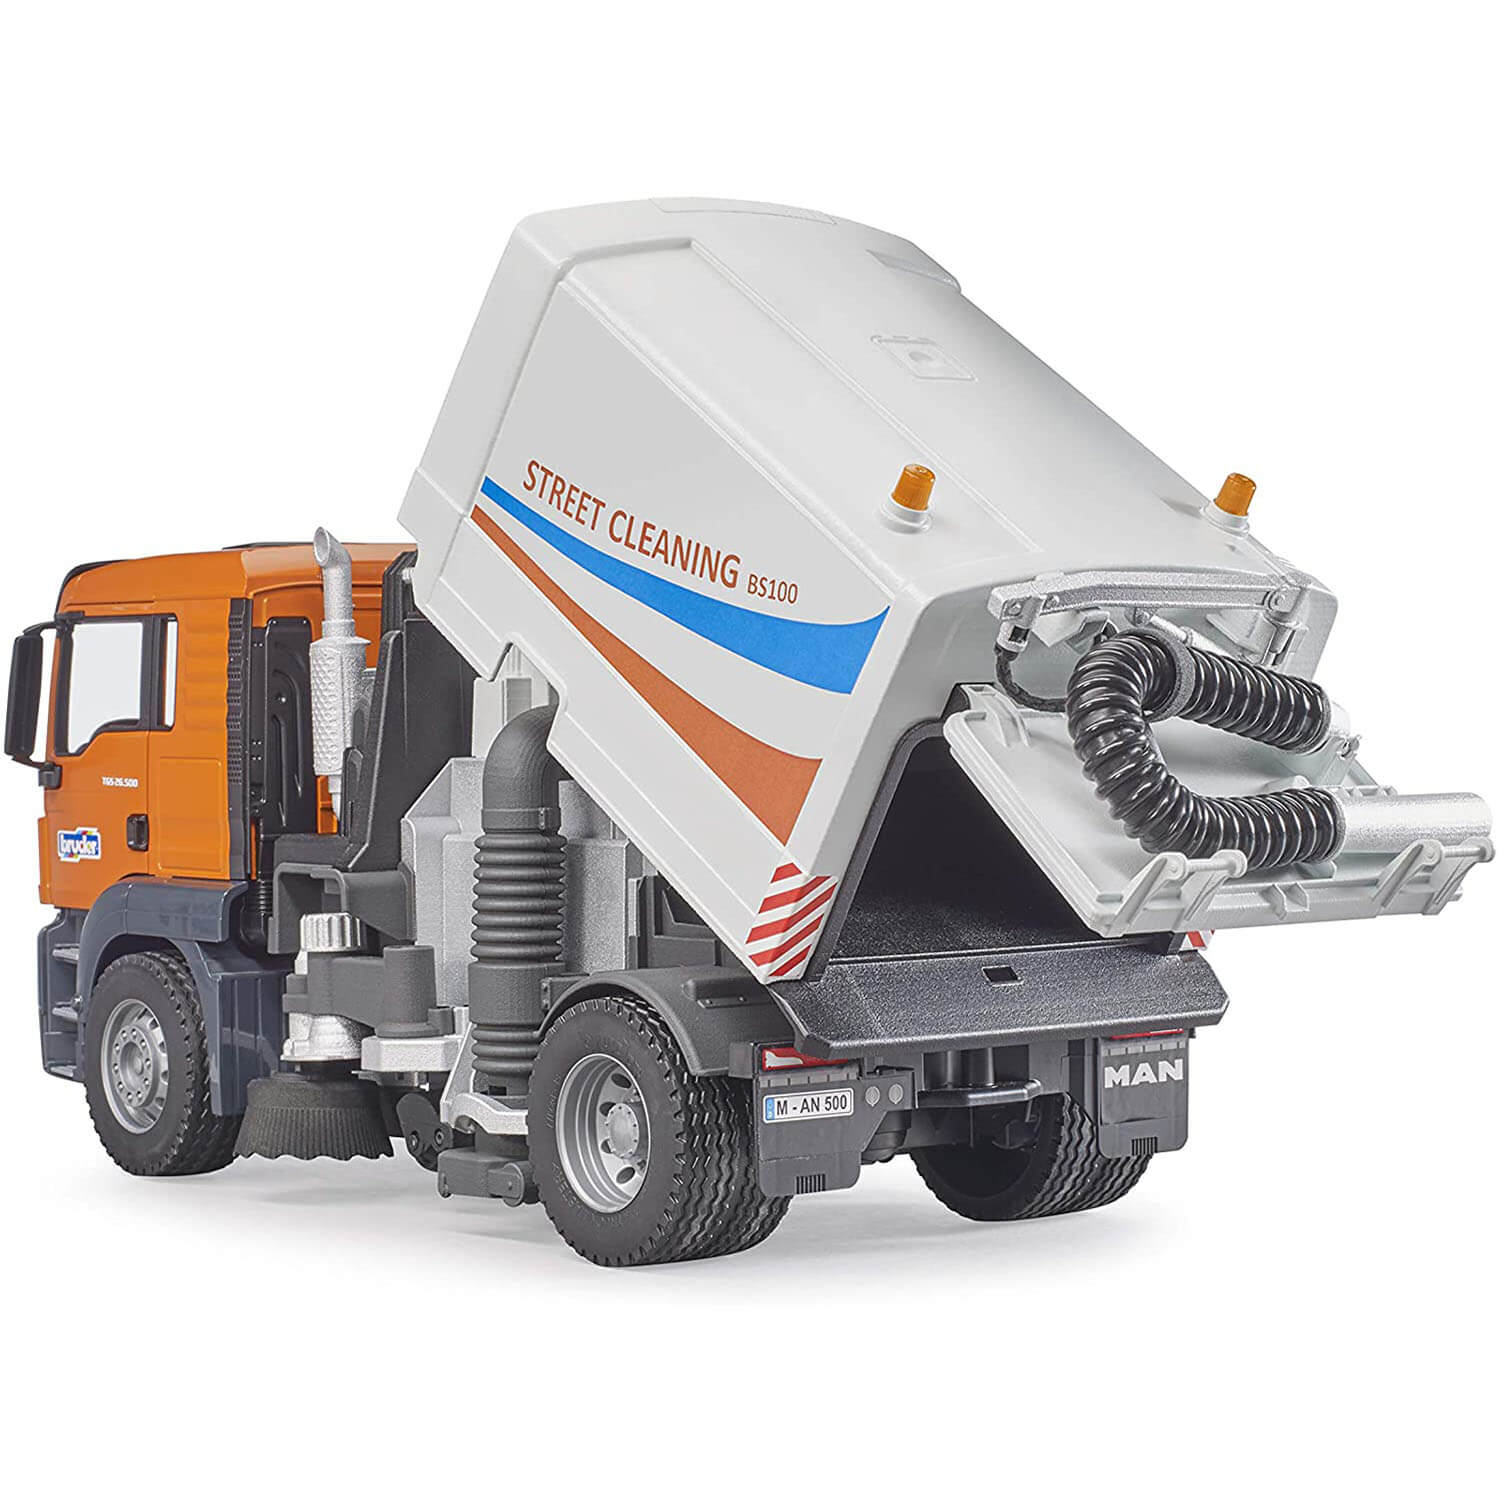 Refuse is raised and open on this rear quarter angle of the Bruder MAN street cleaner.